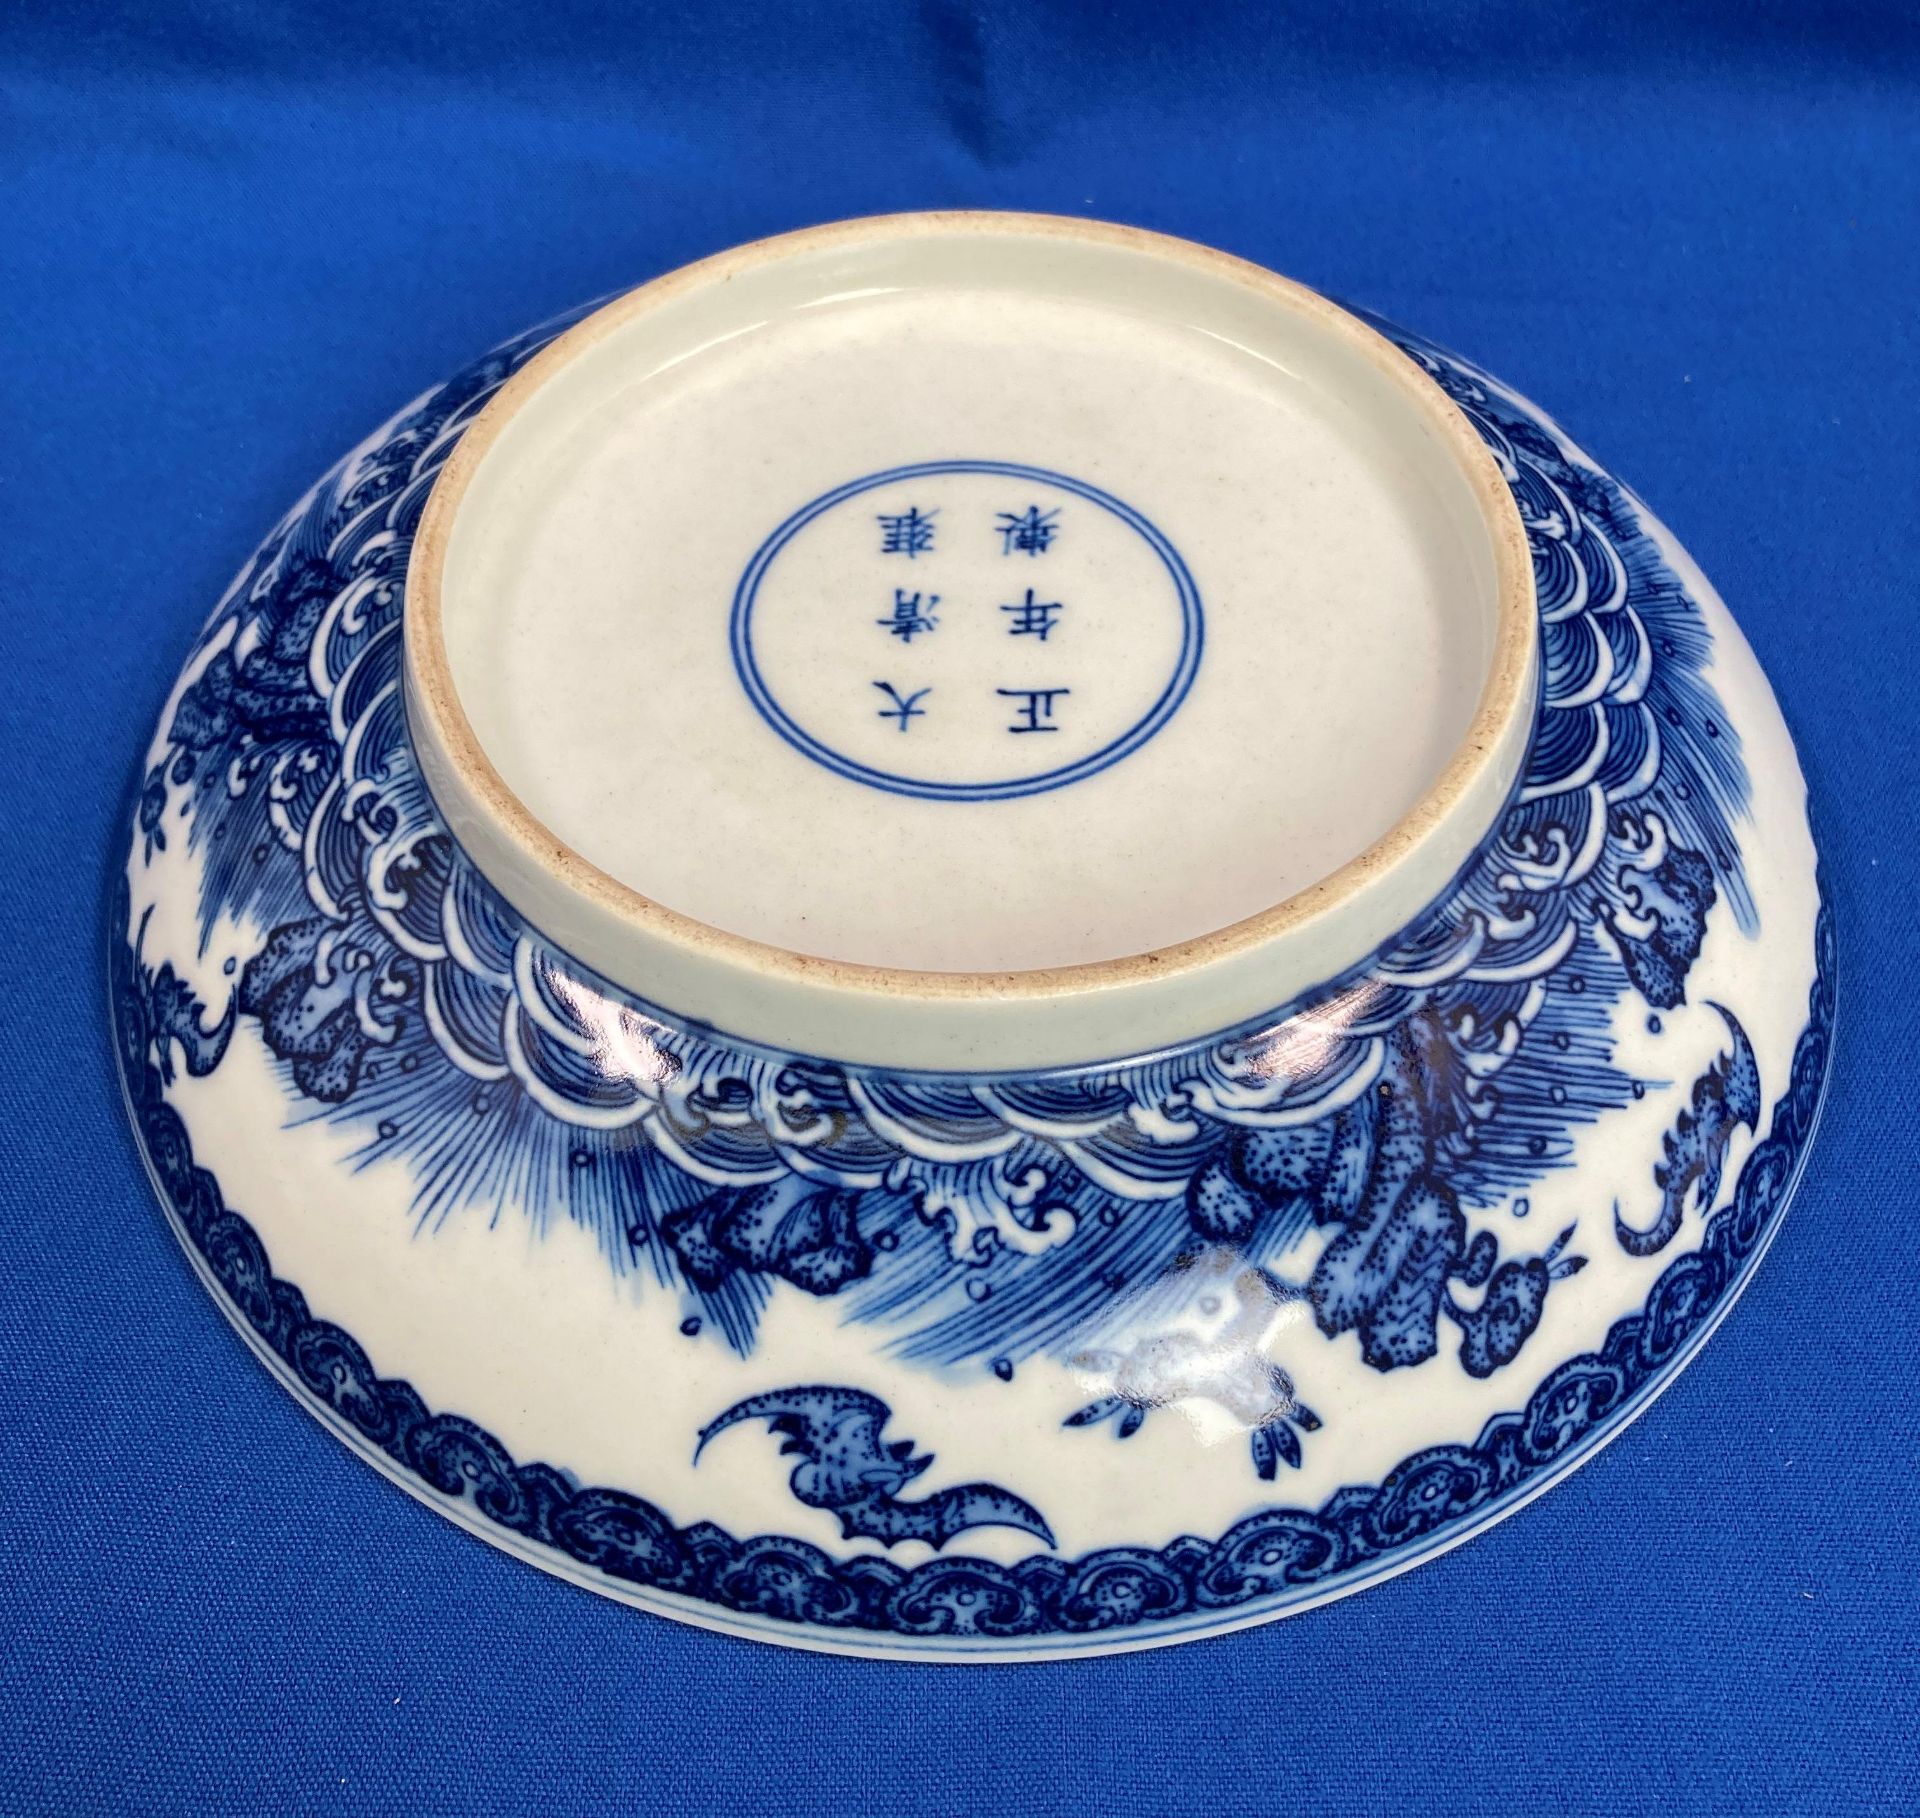 An antique 'Yongzheng' reign blue and white Oriental bowl with fig tree design and six symbol mark - Image 10 of 11